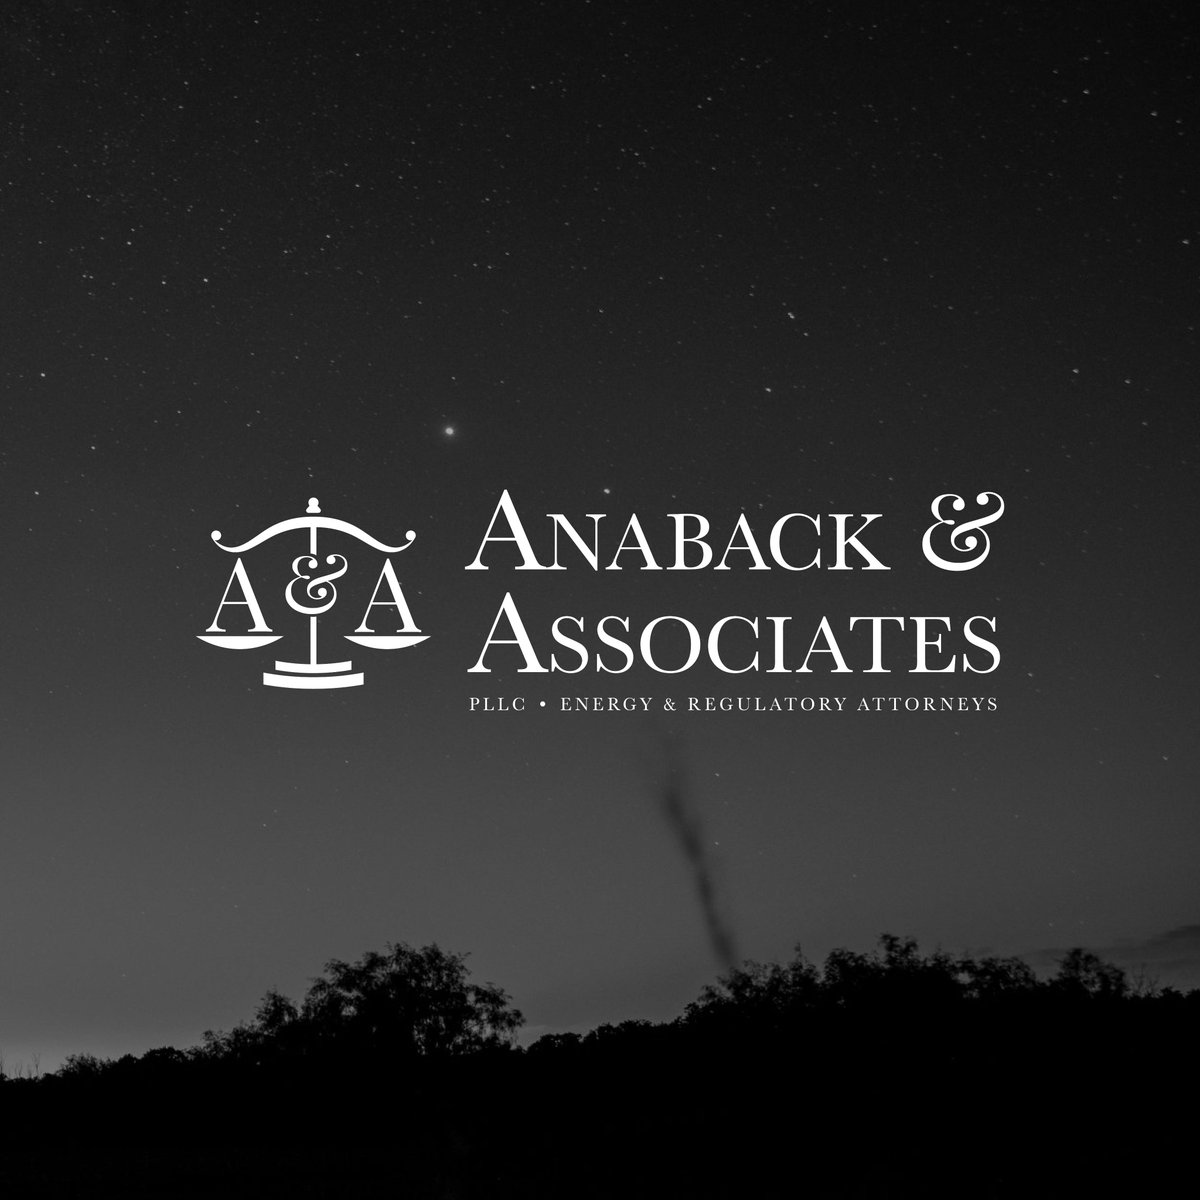 Anaback & Associates, PLLC provides representation in front of State, Local and Federal Government regulatory bodies, specializing in law as it pertains to the energy industry. We worked with Mr. Anaback to create a brand for his firm that has a professional and classic feel.